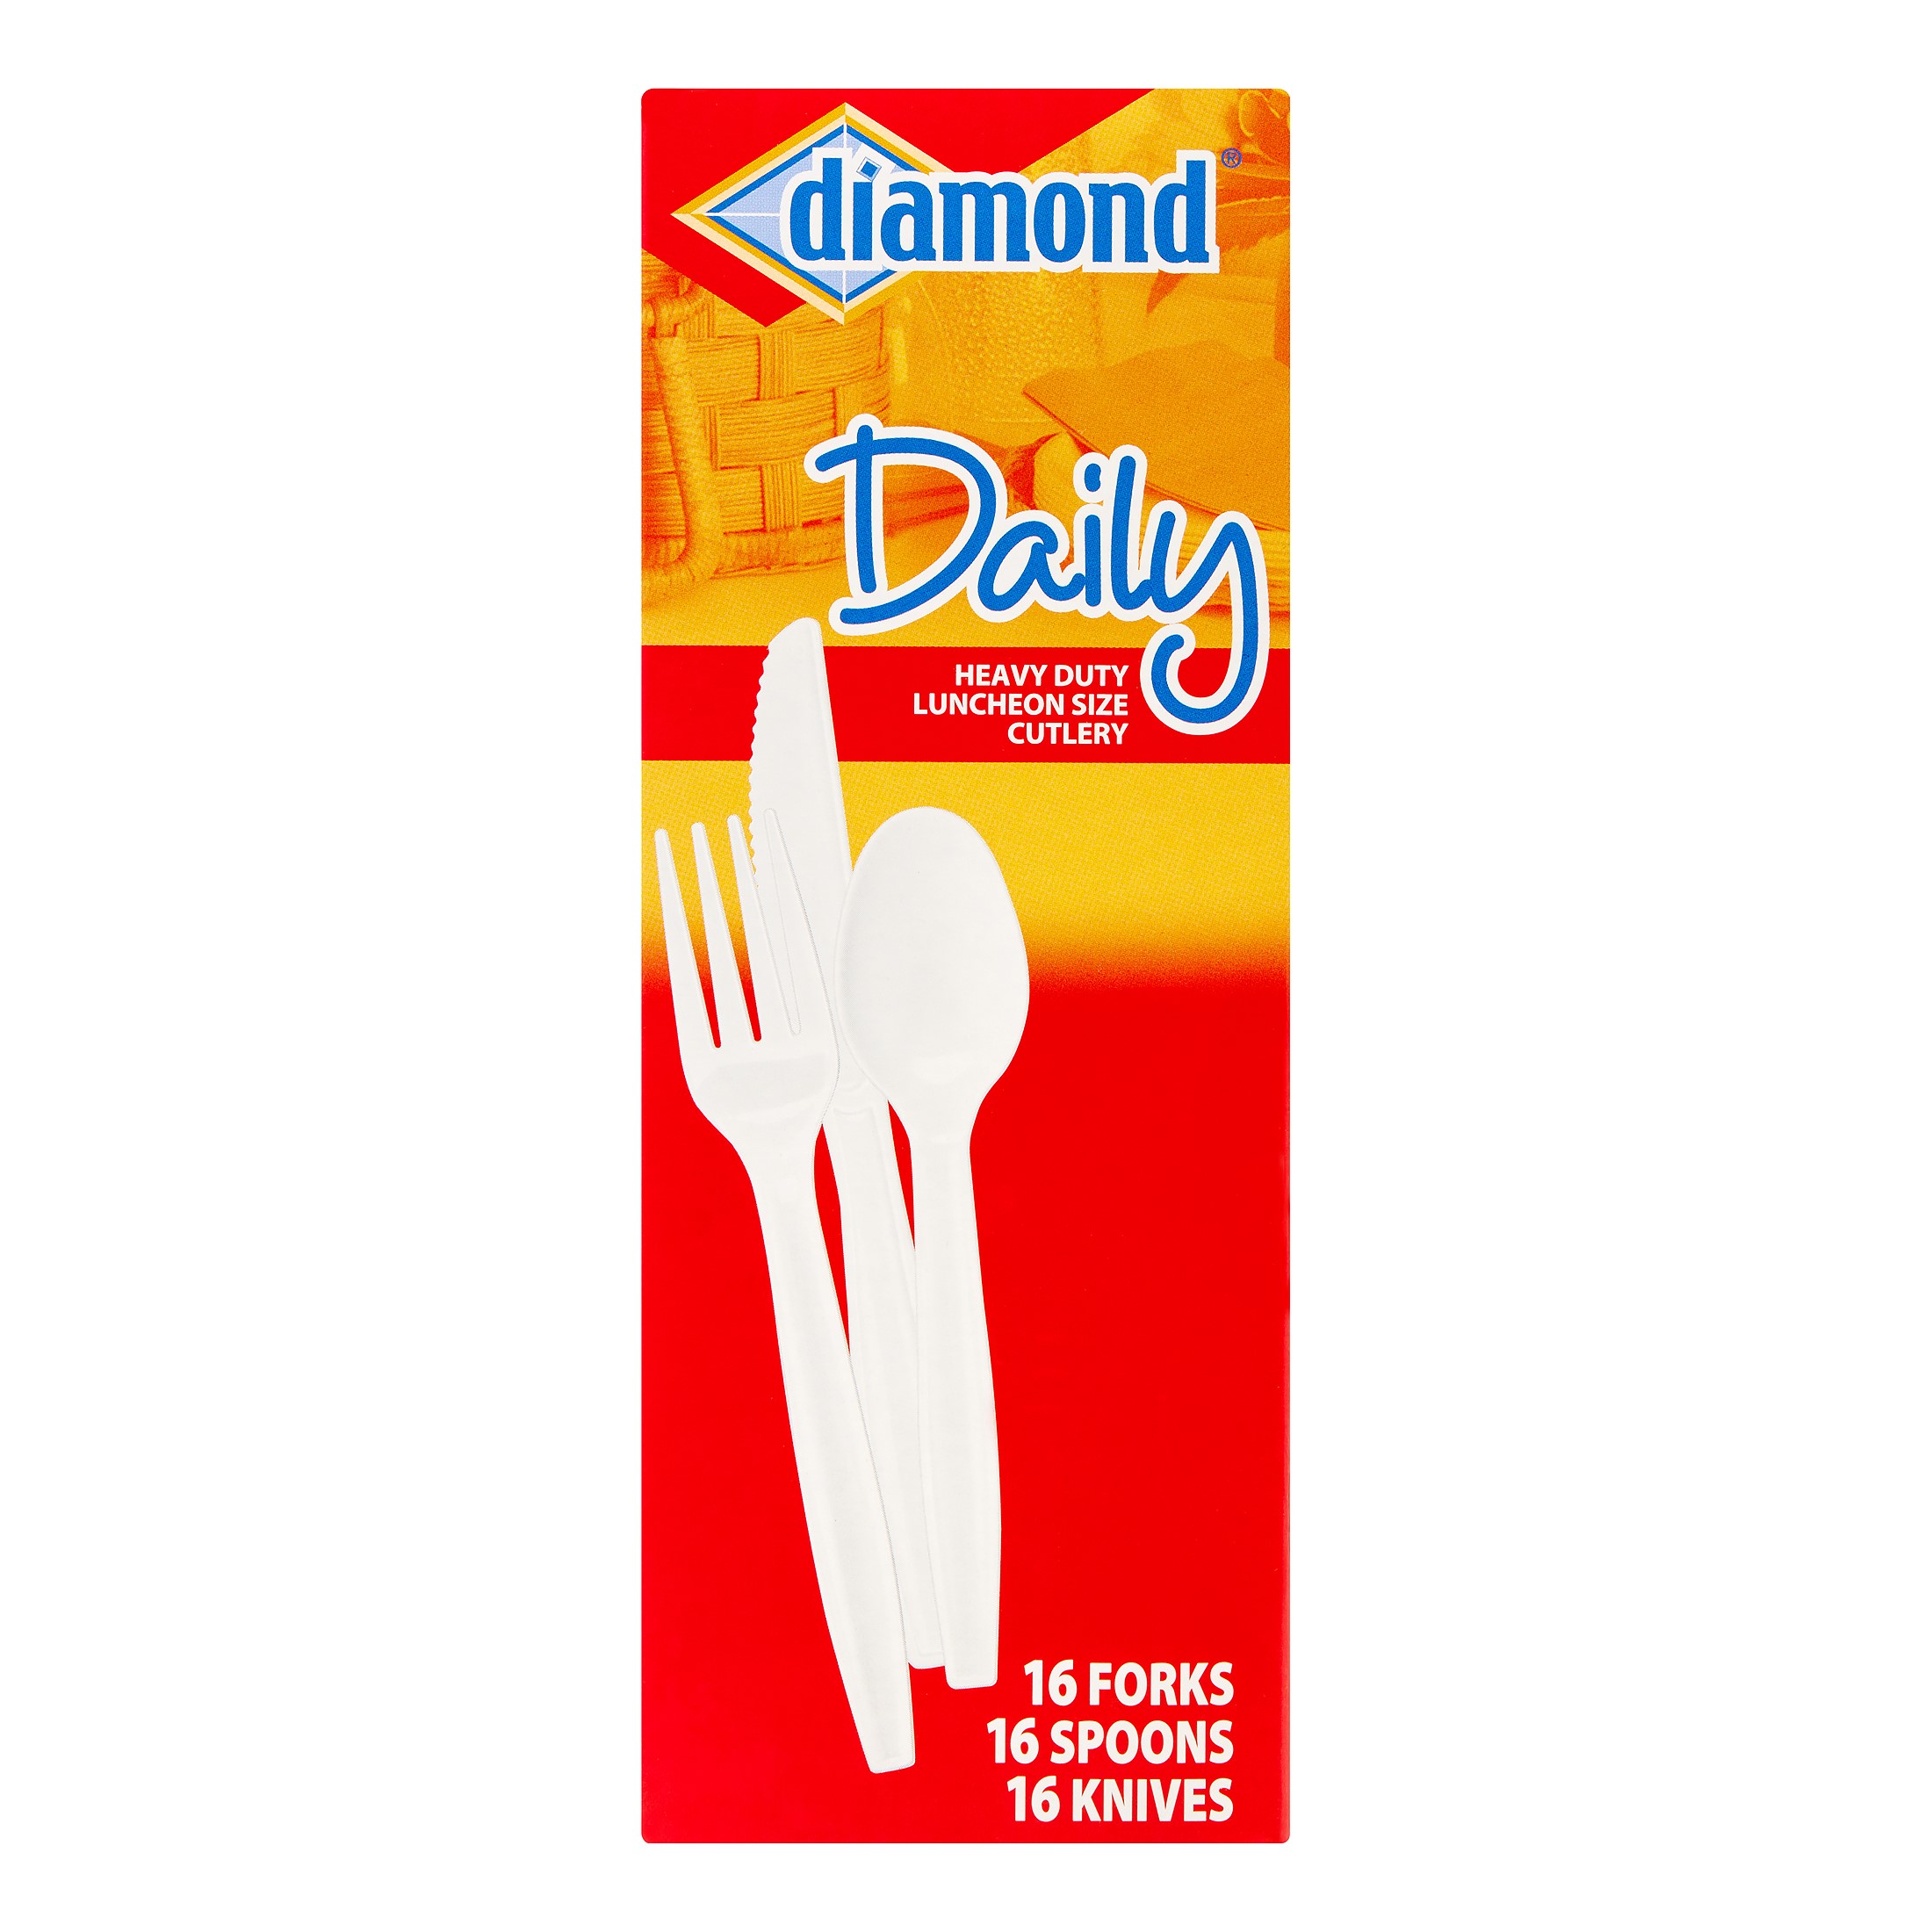 Diamond Heavy Duty Combo Cutlery Pack, White, 48 Ct - image 2 of 4